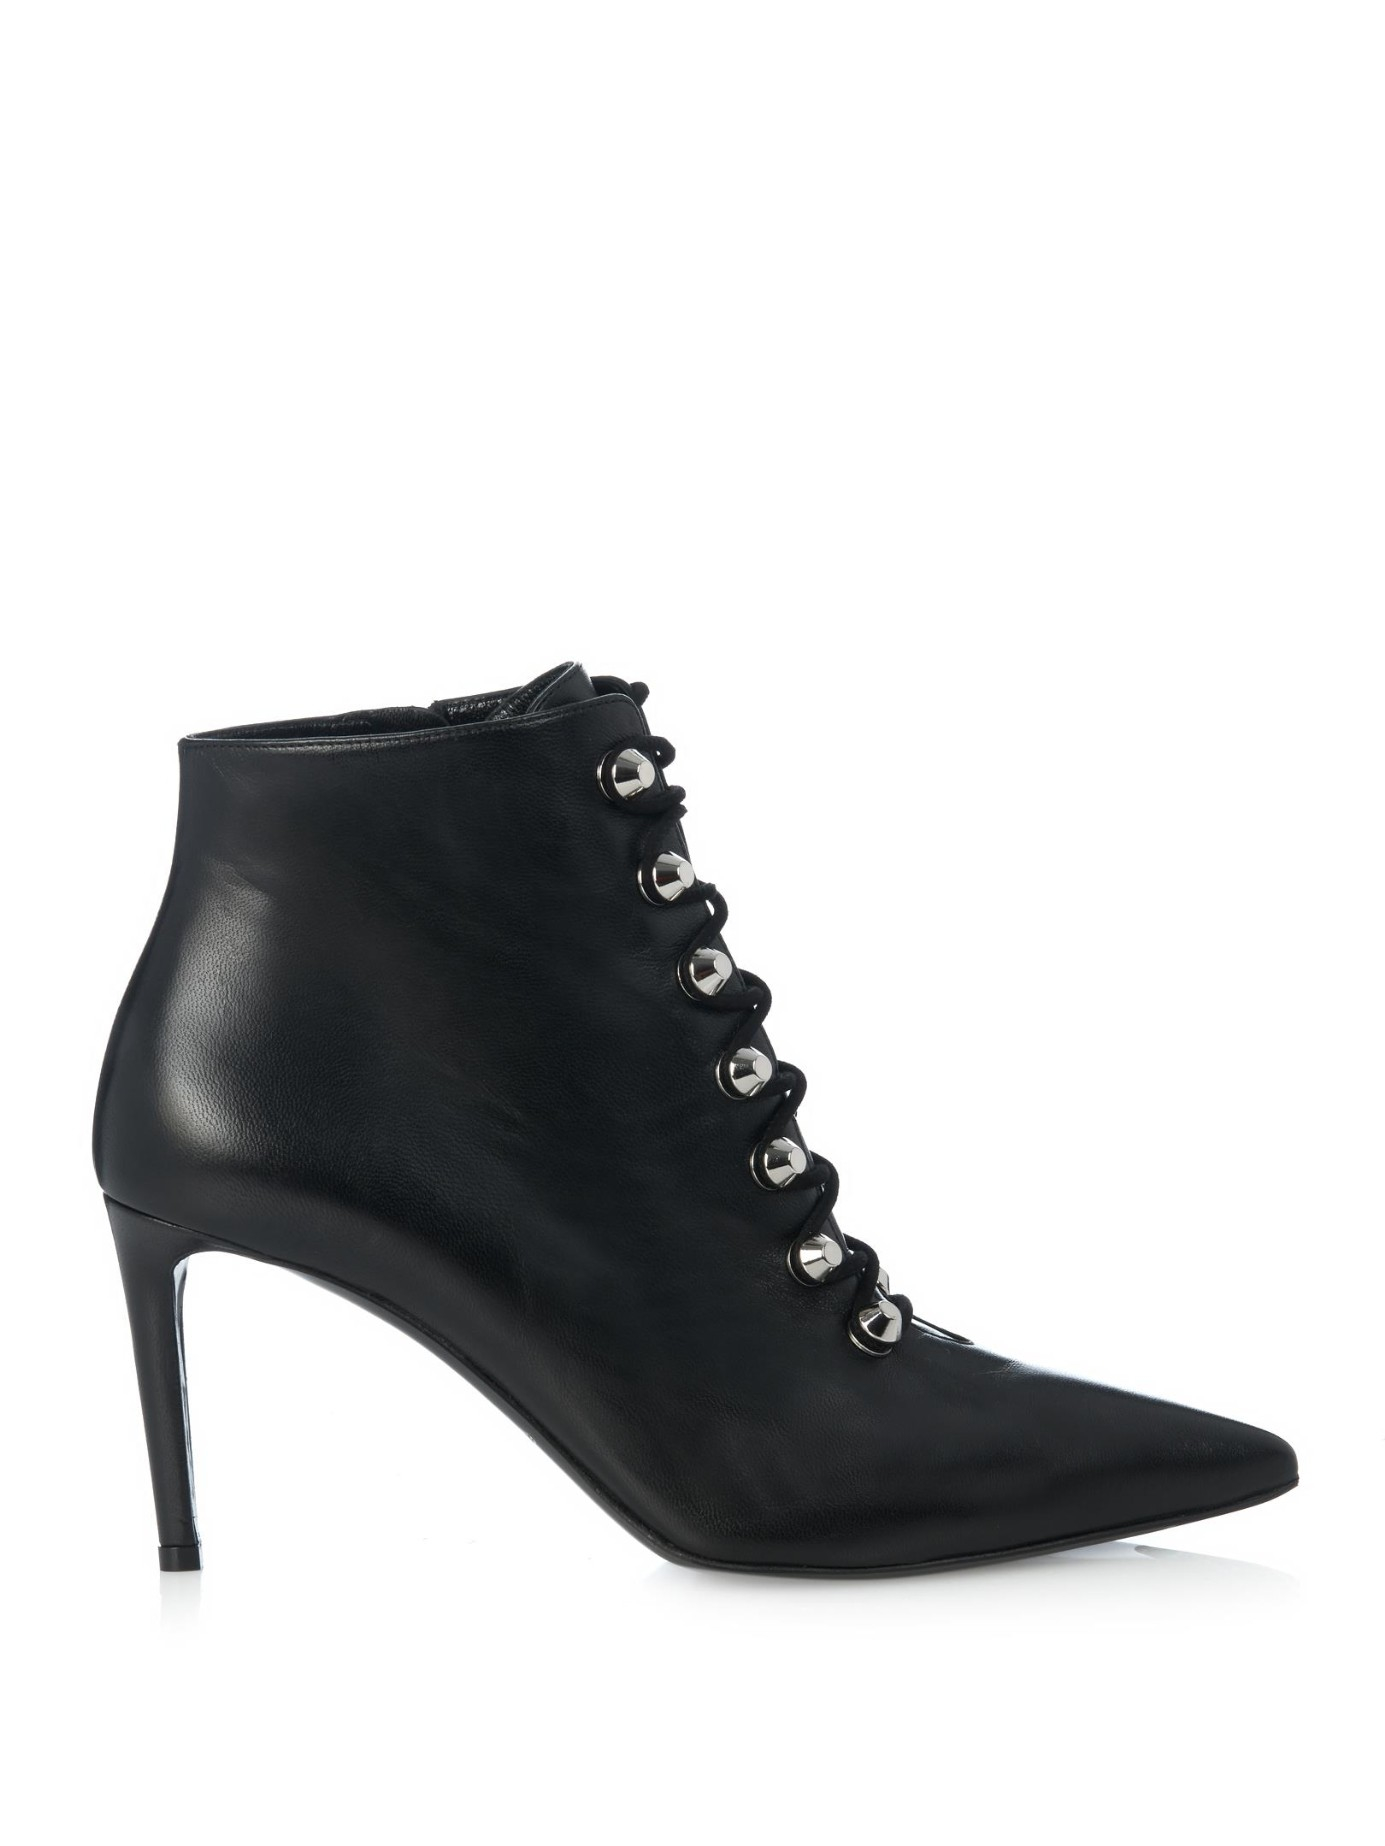 Lyst - Balenciaga Point-Toe Leather Ankle Boots in Black